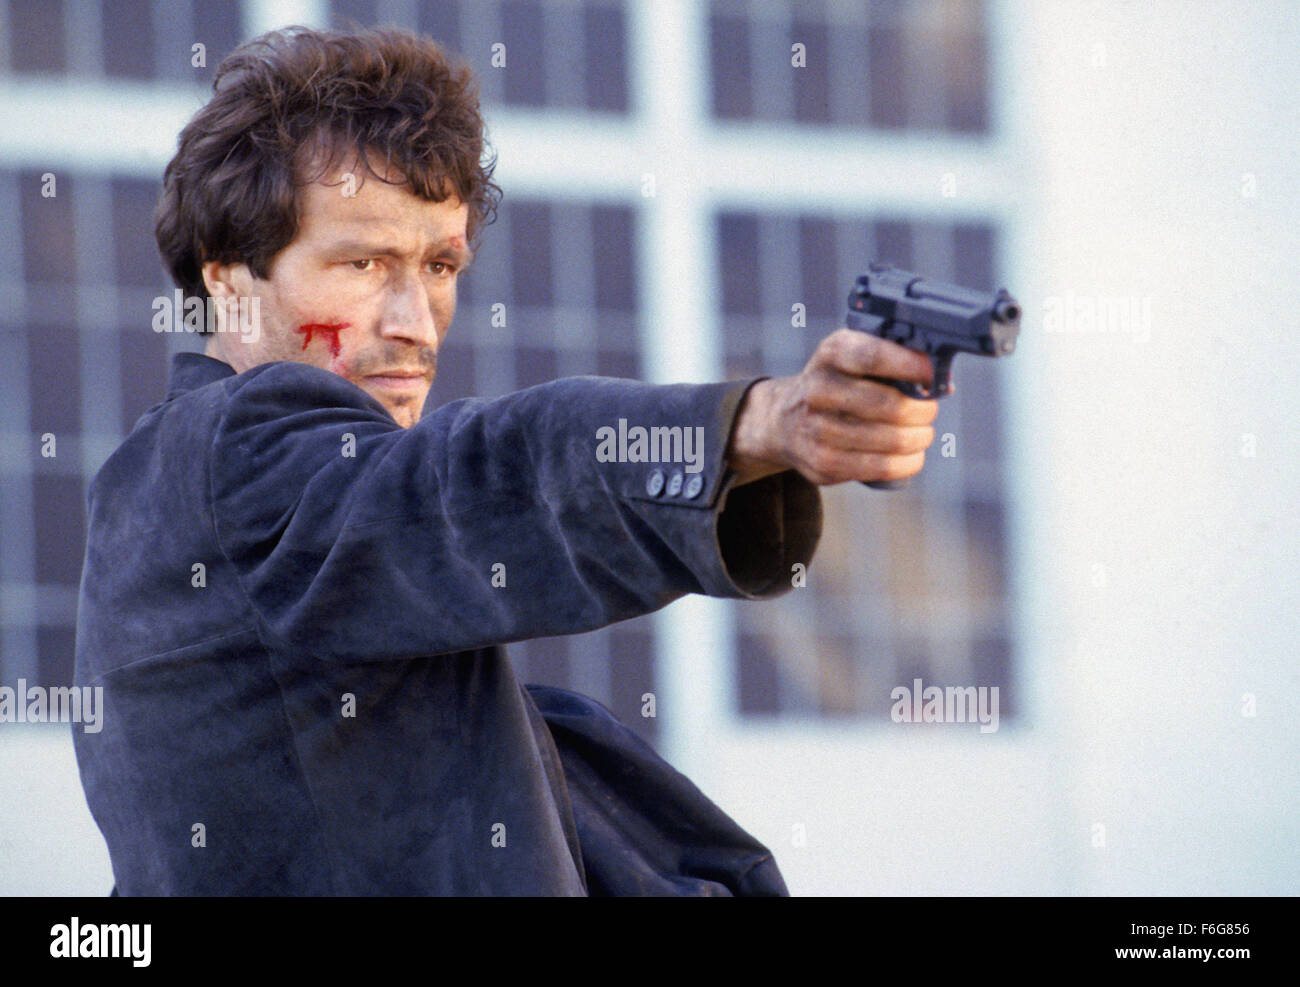 Jan 17, 1997; Los Angeles, CA, USA; Actor MICHAEL WINCOTT as Michael Korda in the Touchstone Pictures action comedy, 'Metro.' Directed by Thomas Carter. Stock Photo